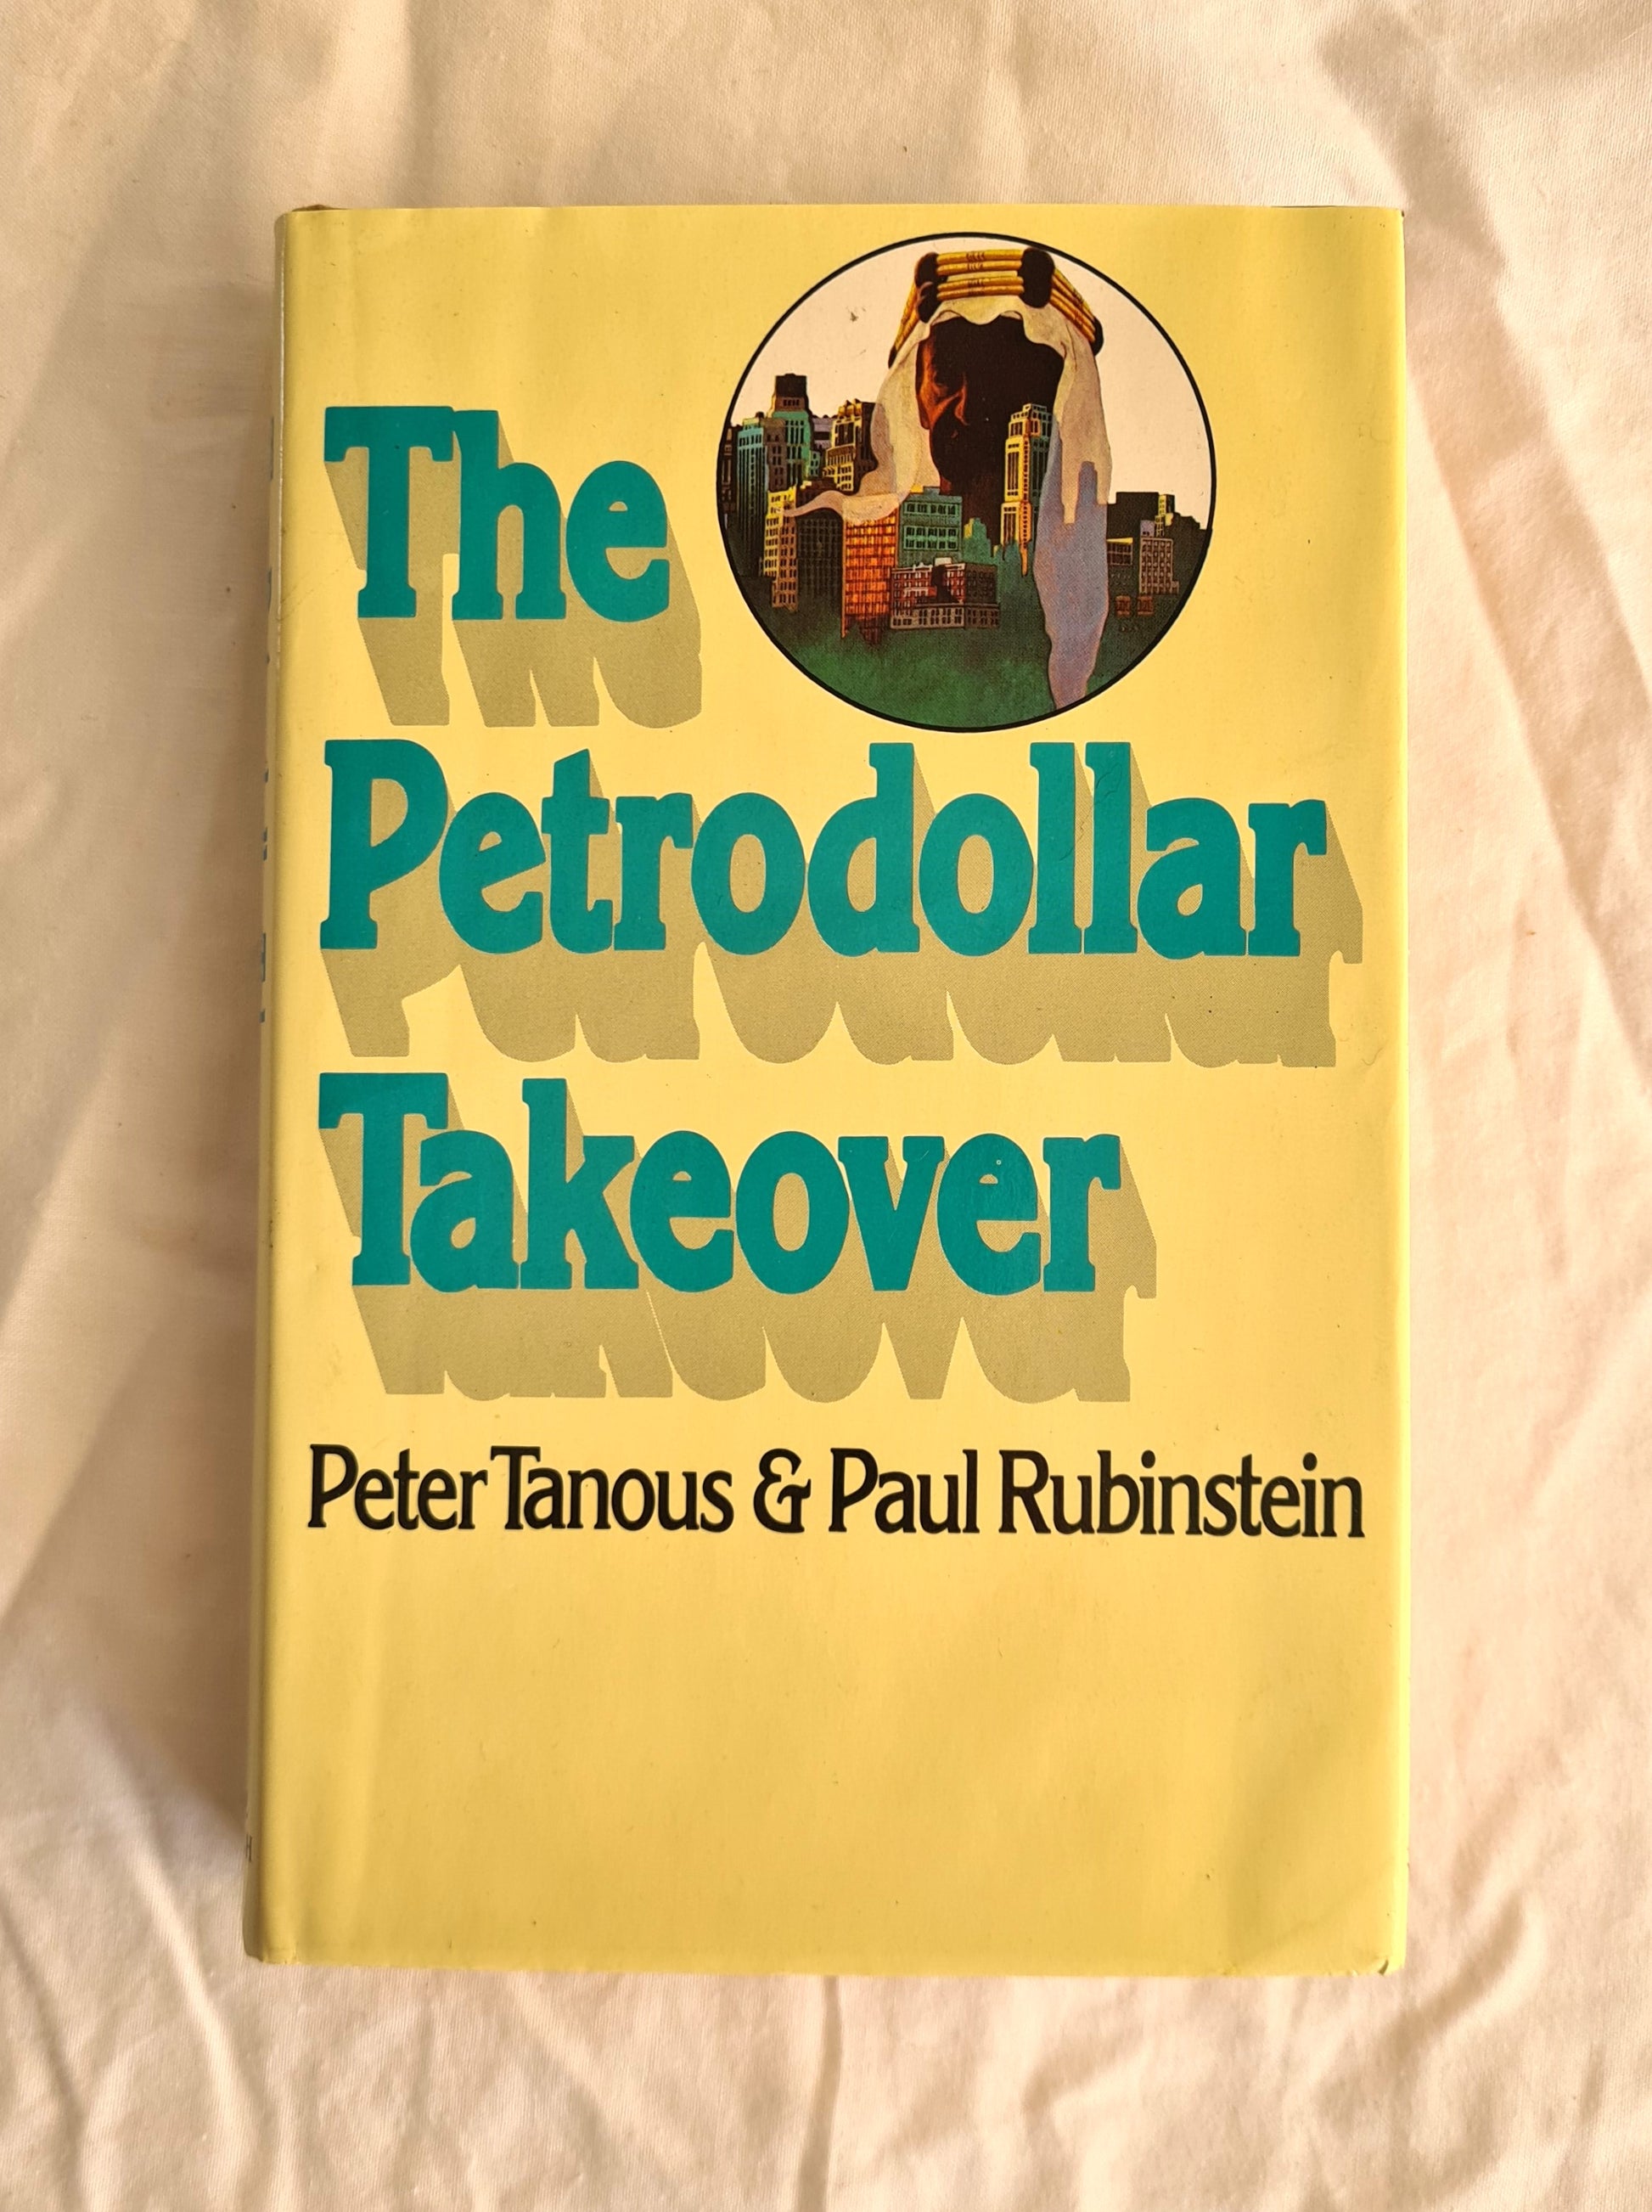 The Petrodollar Takeover  by Peter Tanous and Paul Rubinstein